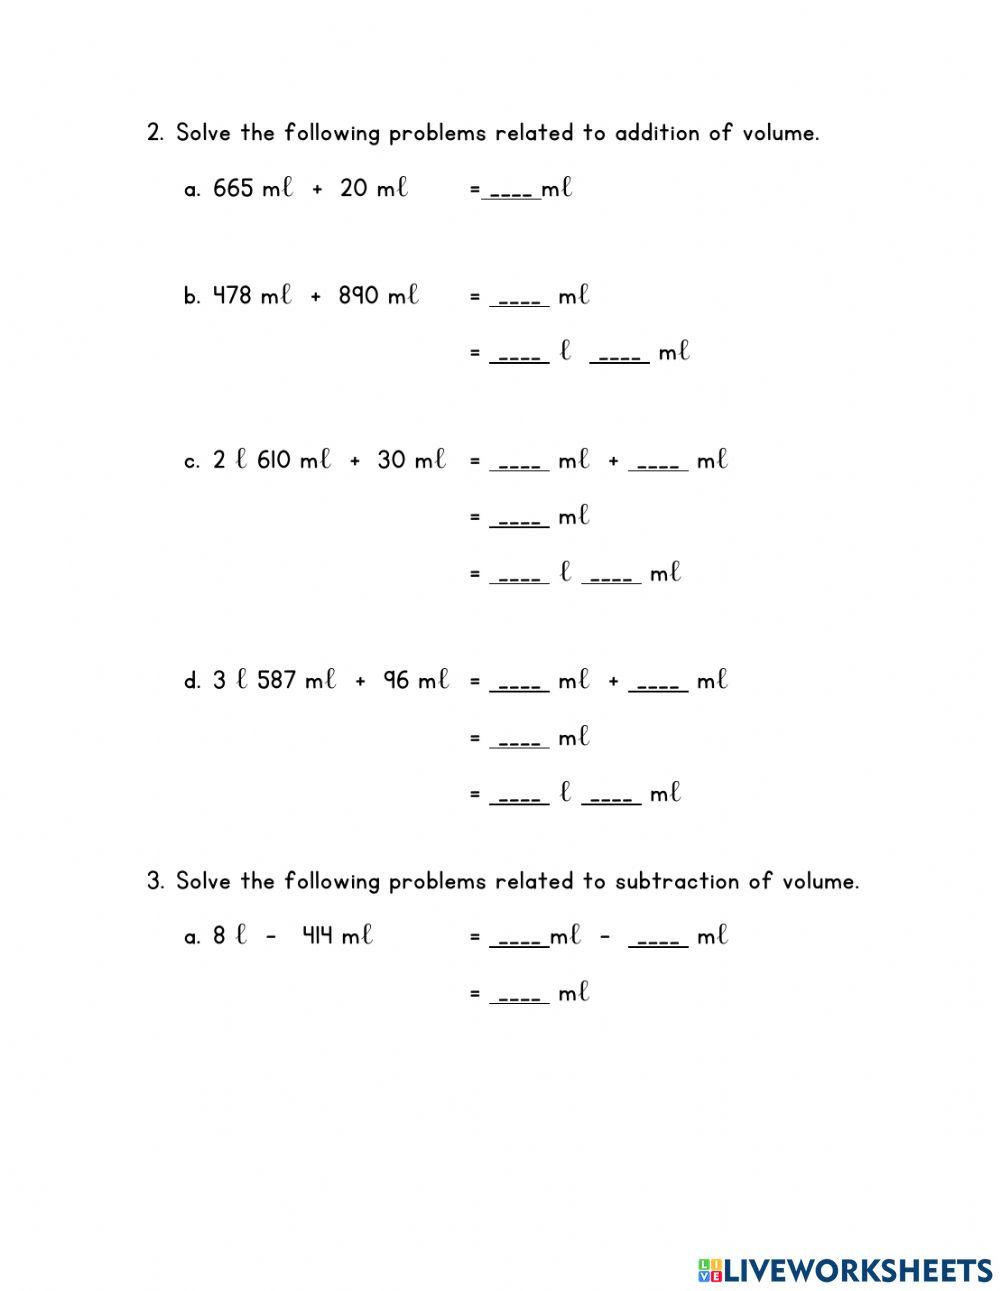 Addition and Subtraction of Volume of Liquid